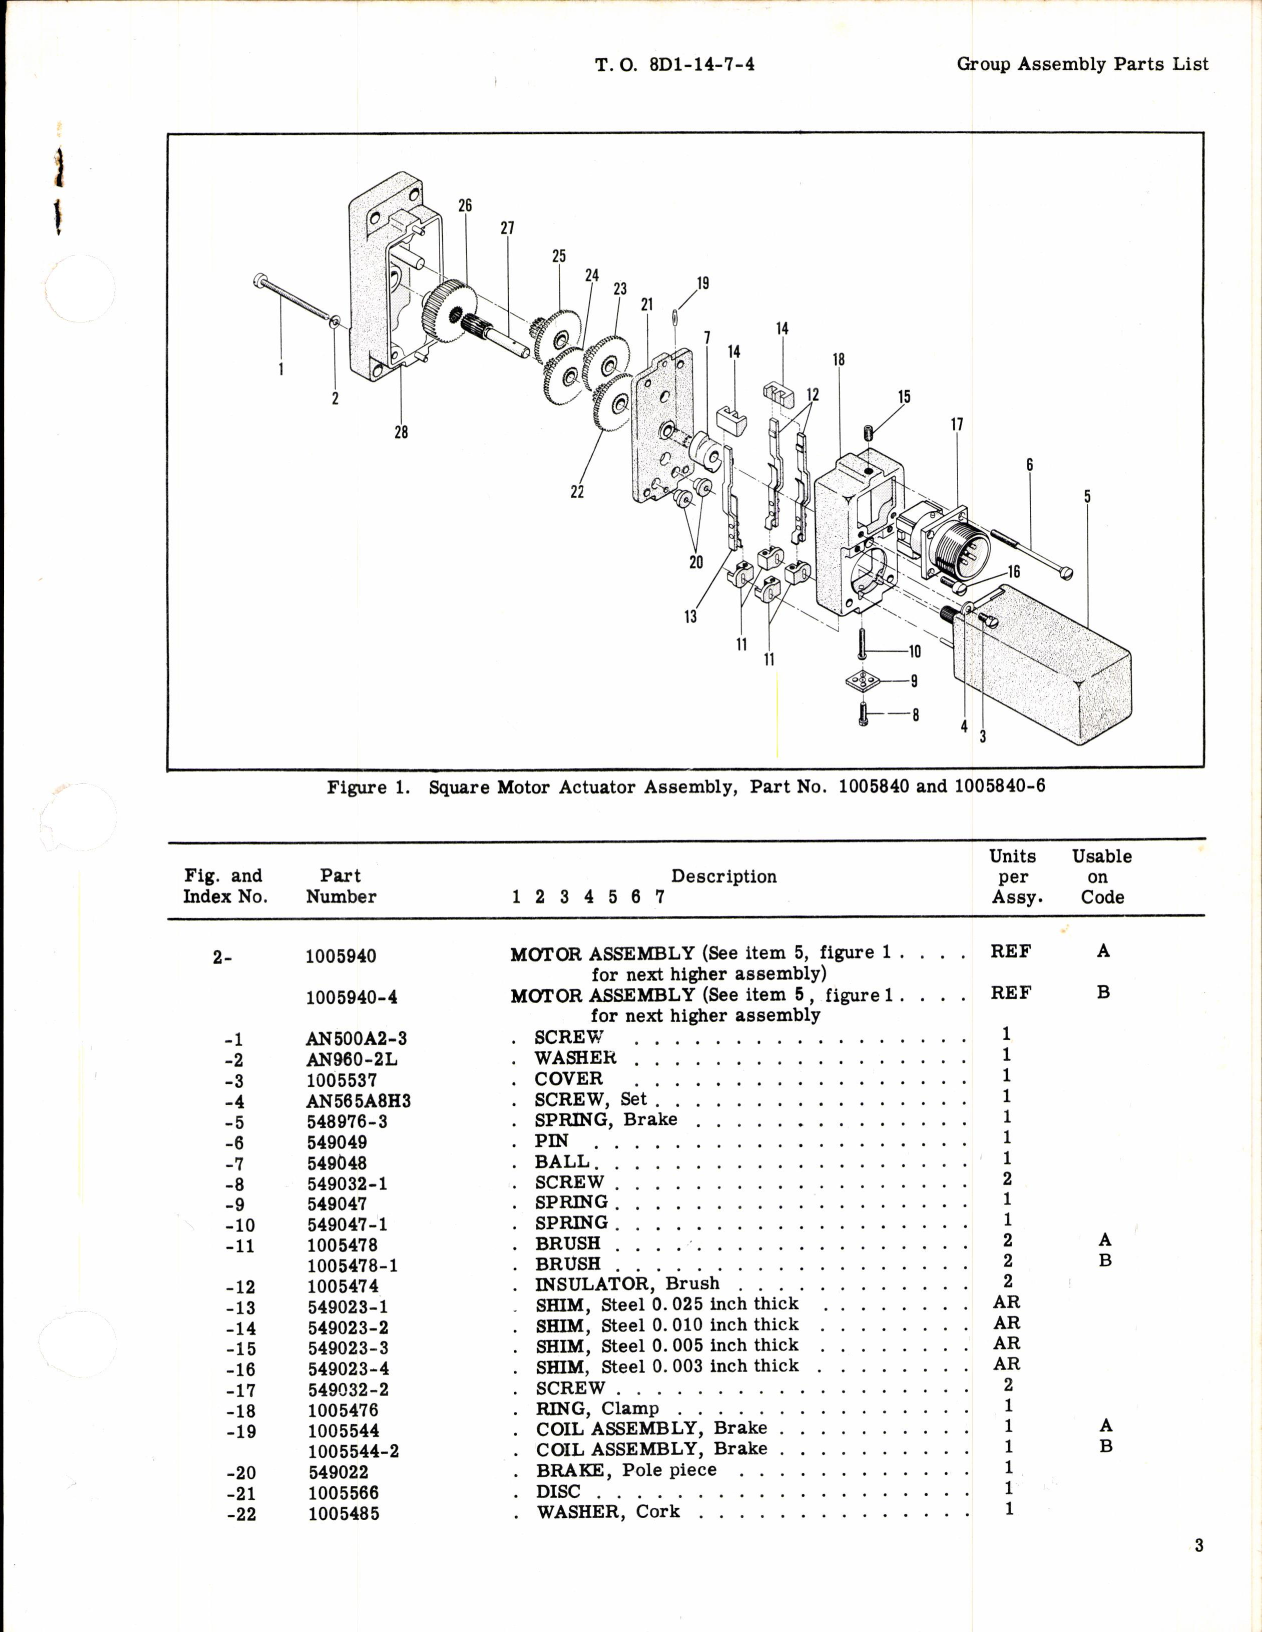 Sample page 3 from AirCorps Library document: Parts Breakdown for Square Motor Actuator Series 128 (Part numbers: 1005840 and 1005840-6_